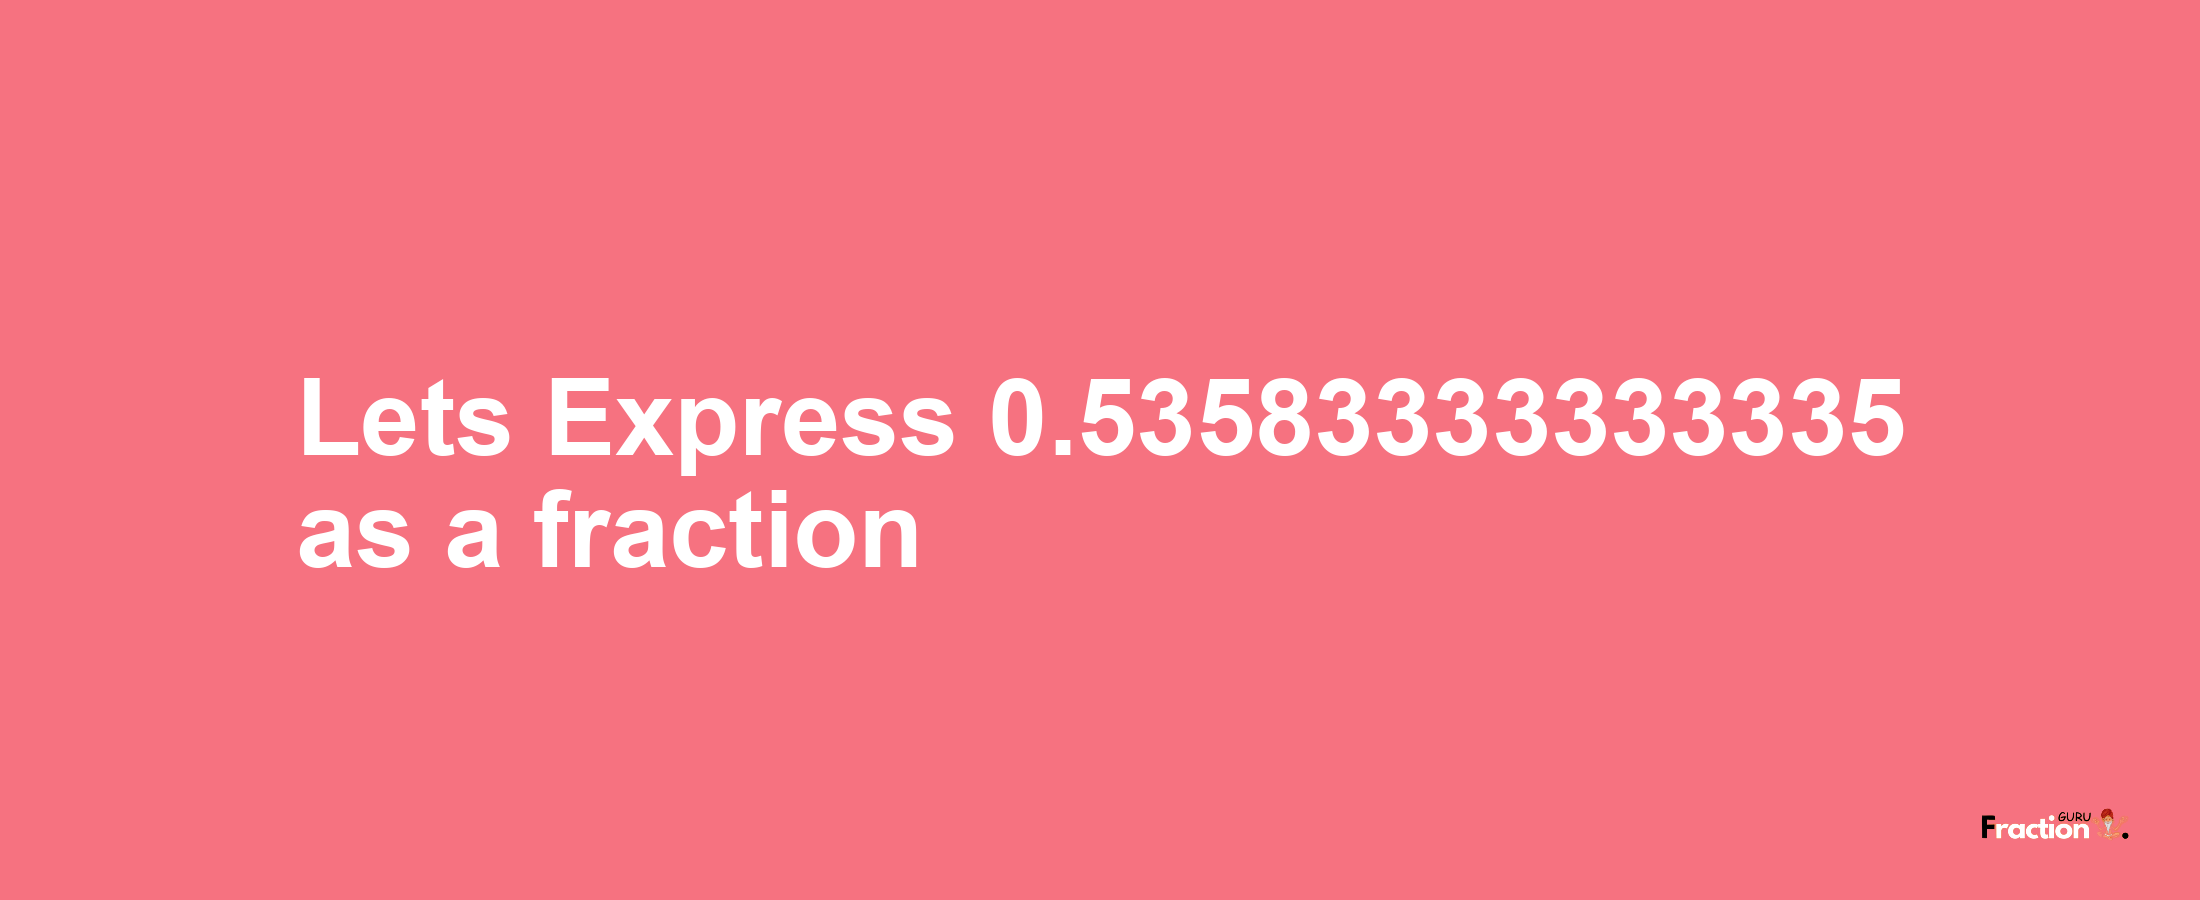 Lets Express 0.53583333333335 as afraction